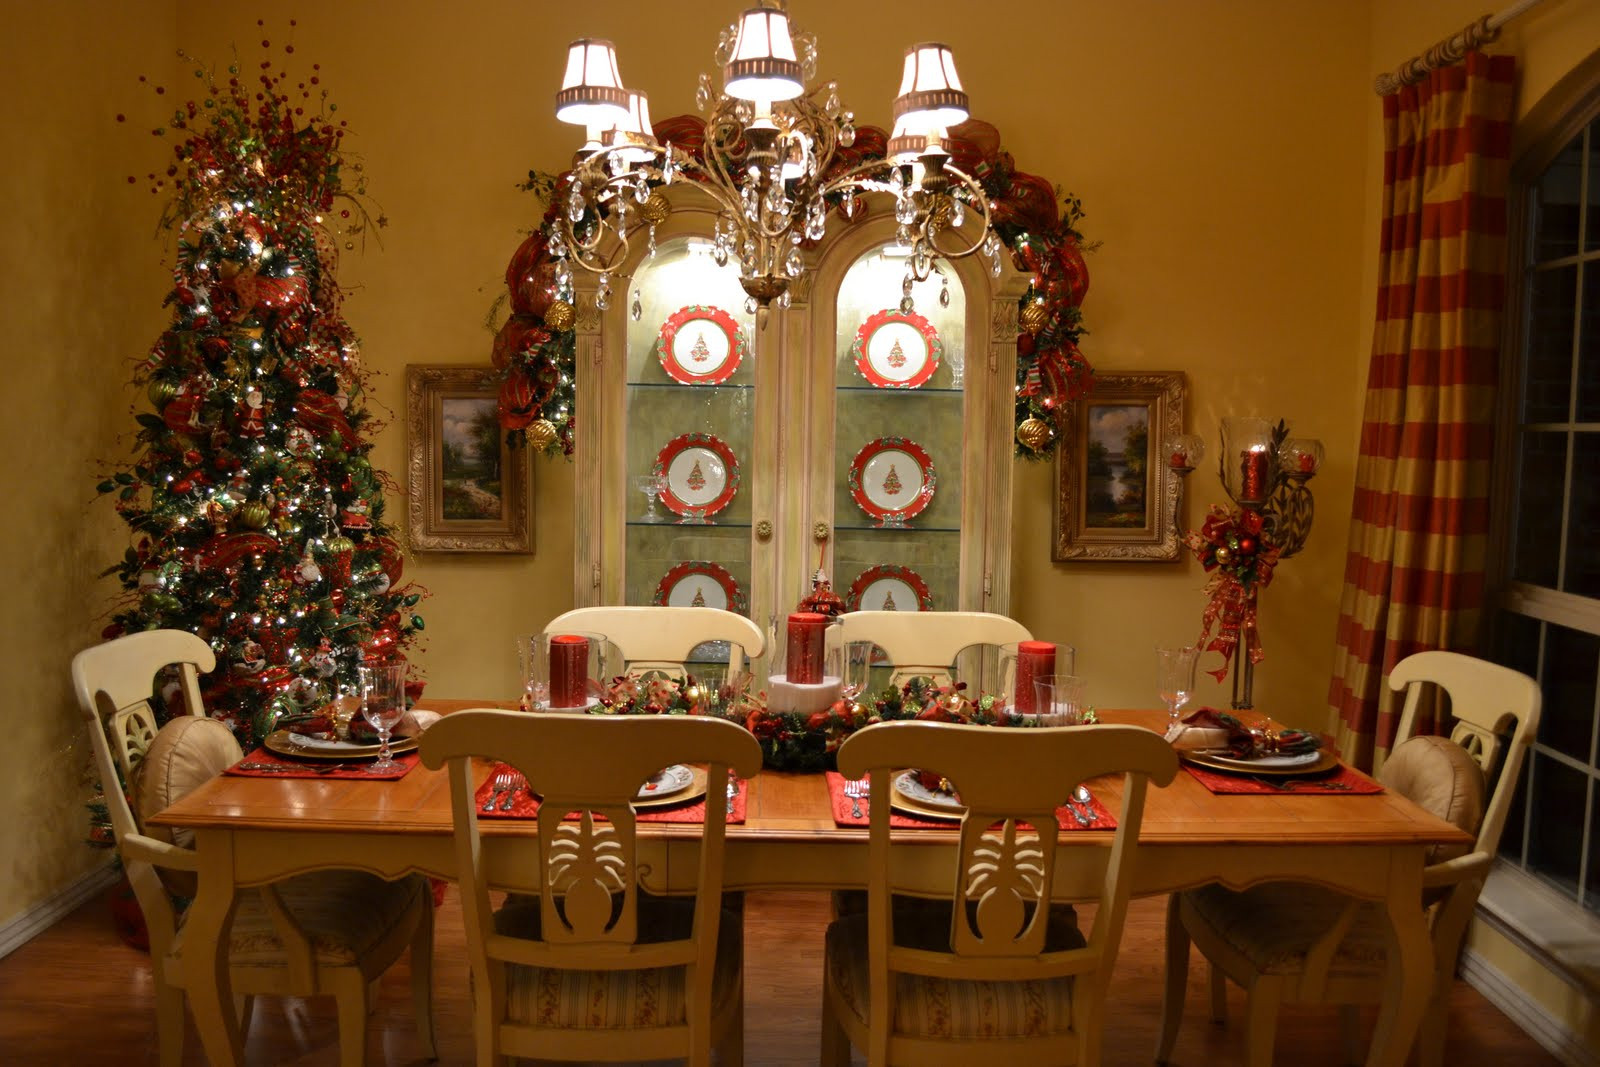 Dining Room Christmas Decorating
 Kristen s Creations My Christmas Dining Room